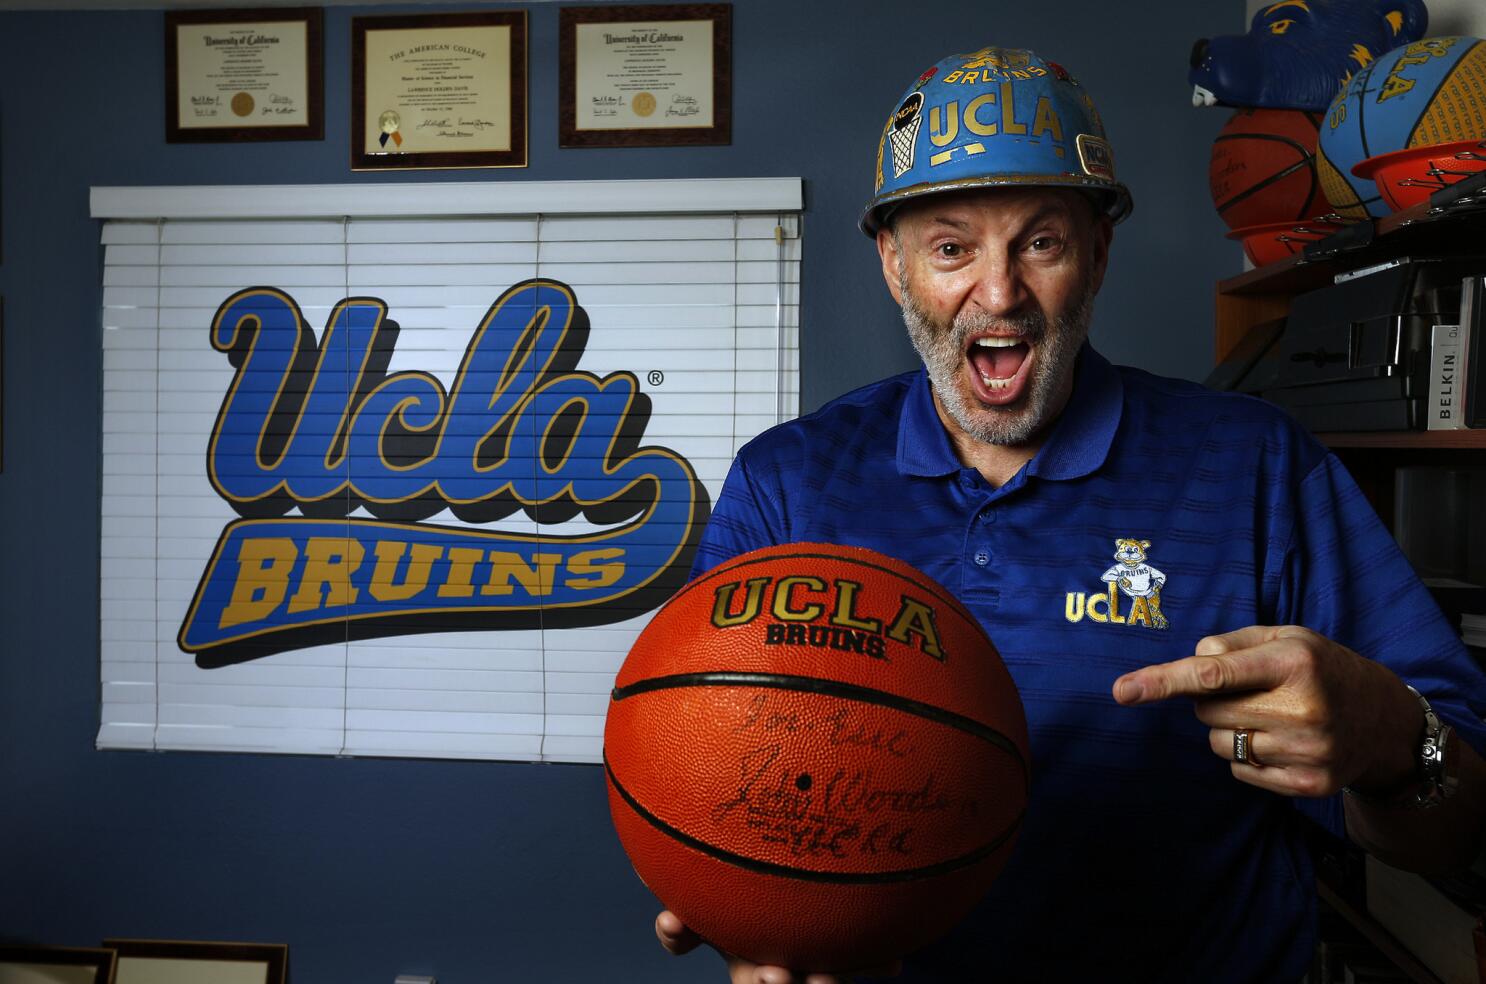 Calling all Bruins: Support our UCLA Spirit Squad!